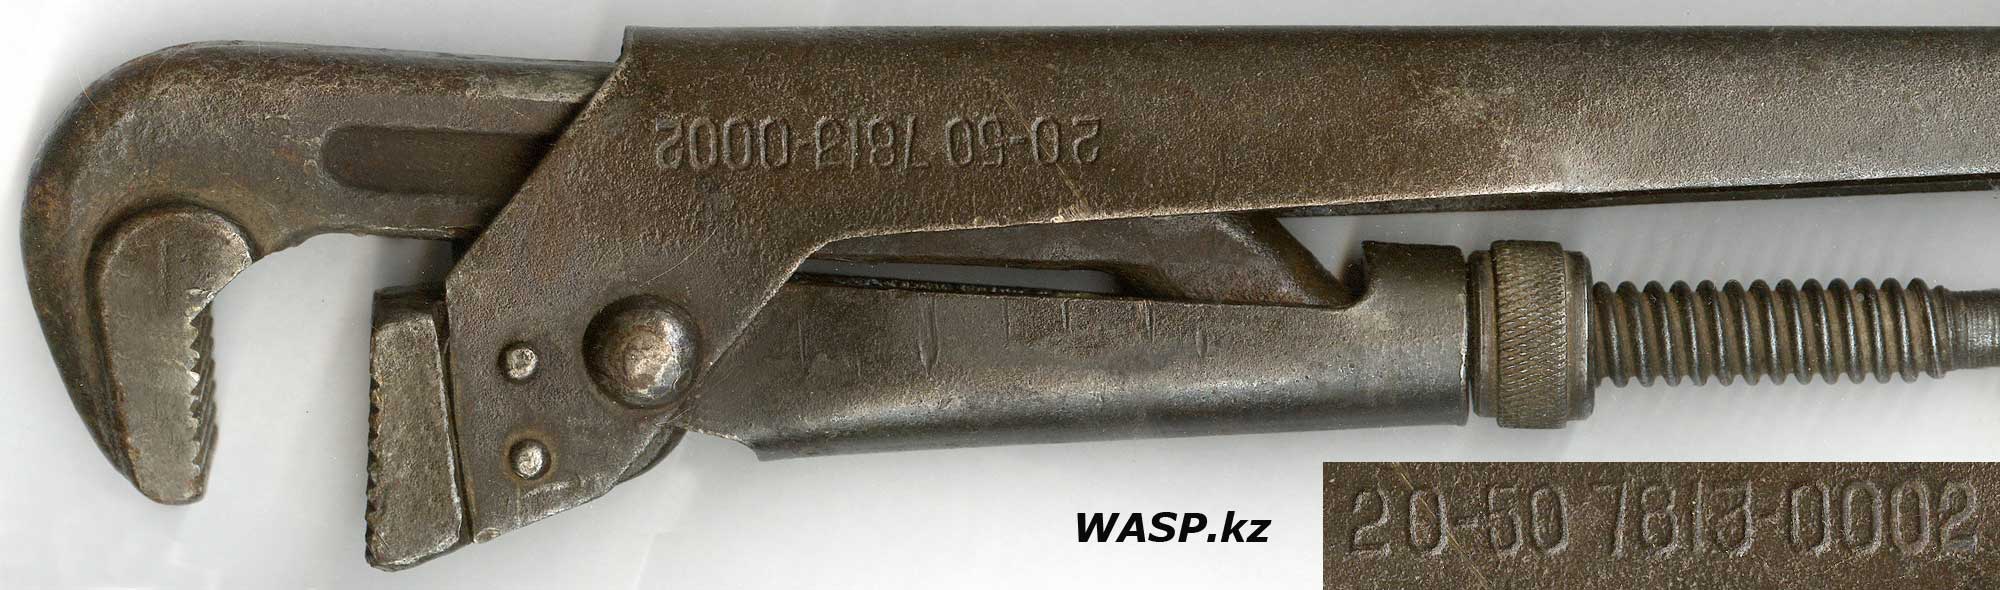 wasp.kz/23/003-steel-loving-who-is-to.jpg